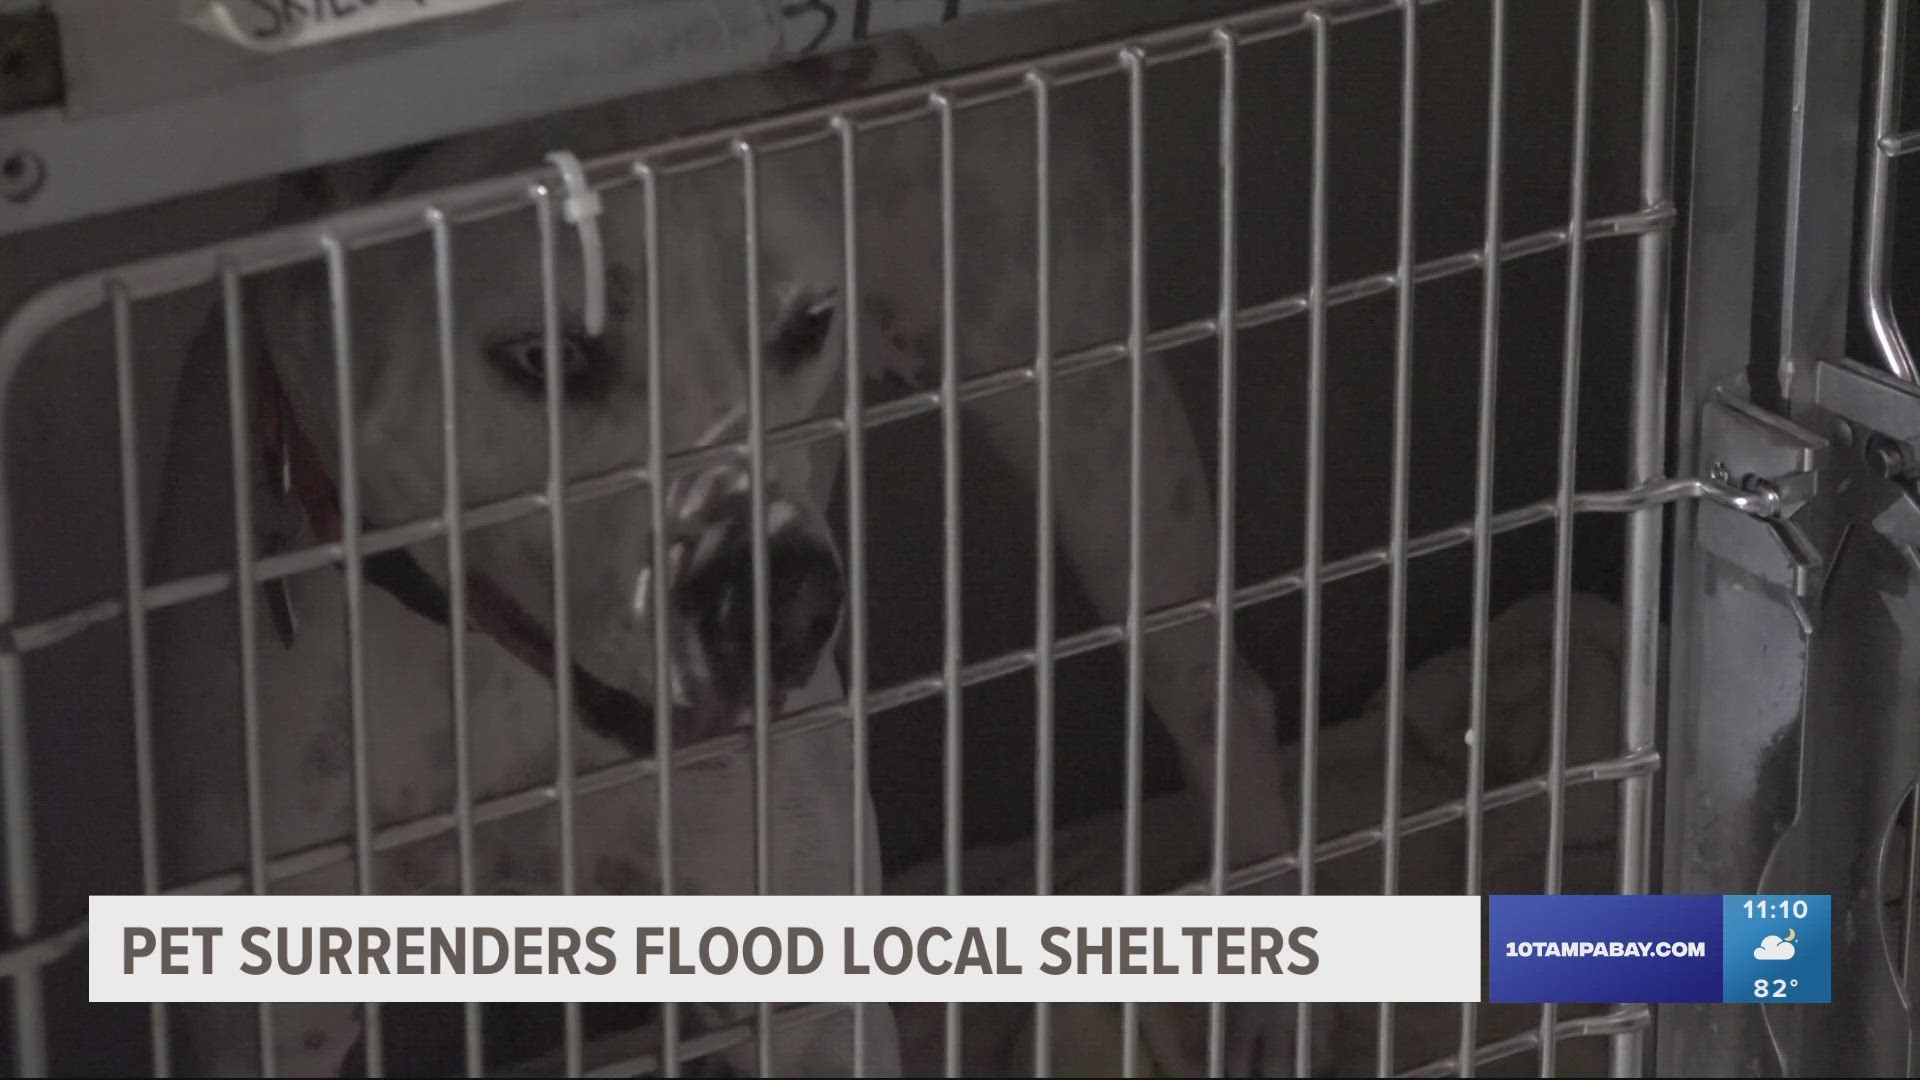 There's an unprecedented level of pet surrenders flooding local animal shelters.